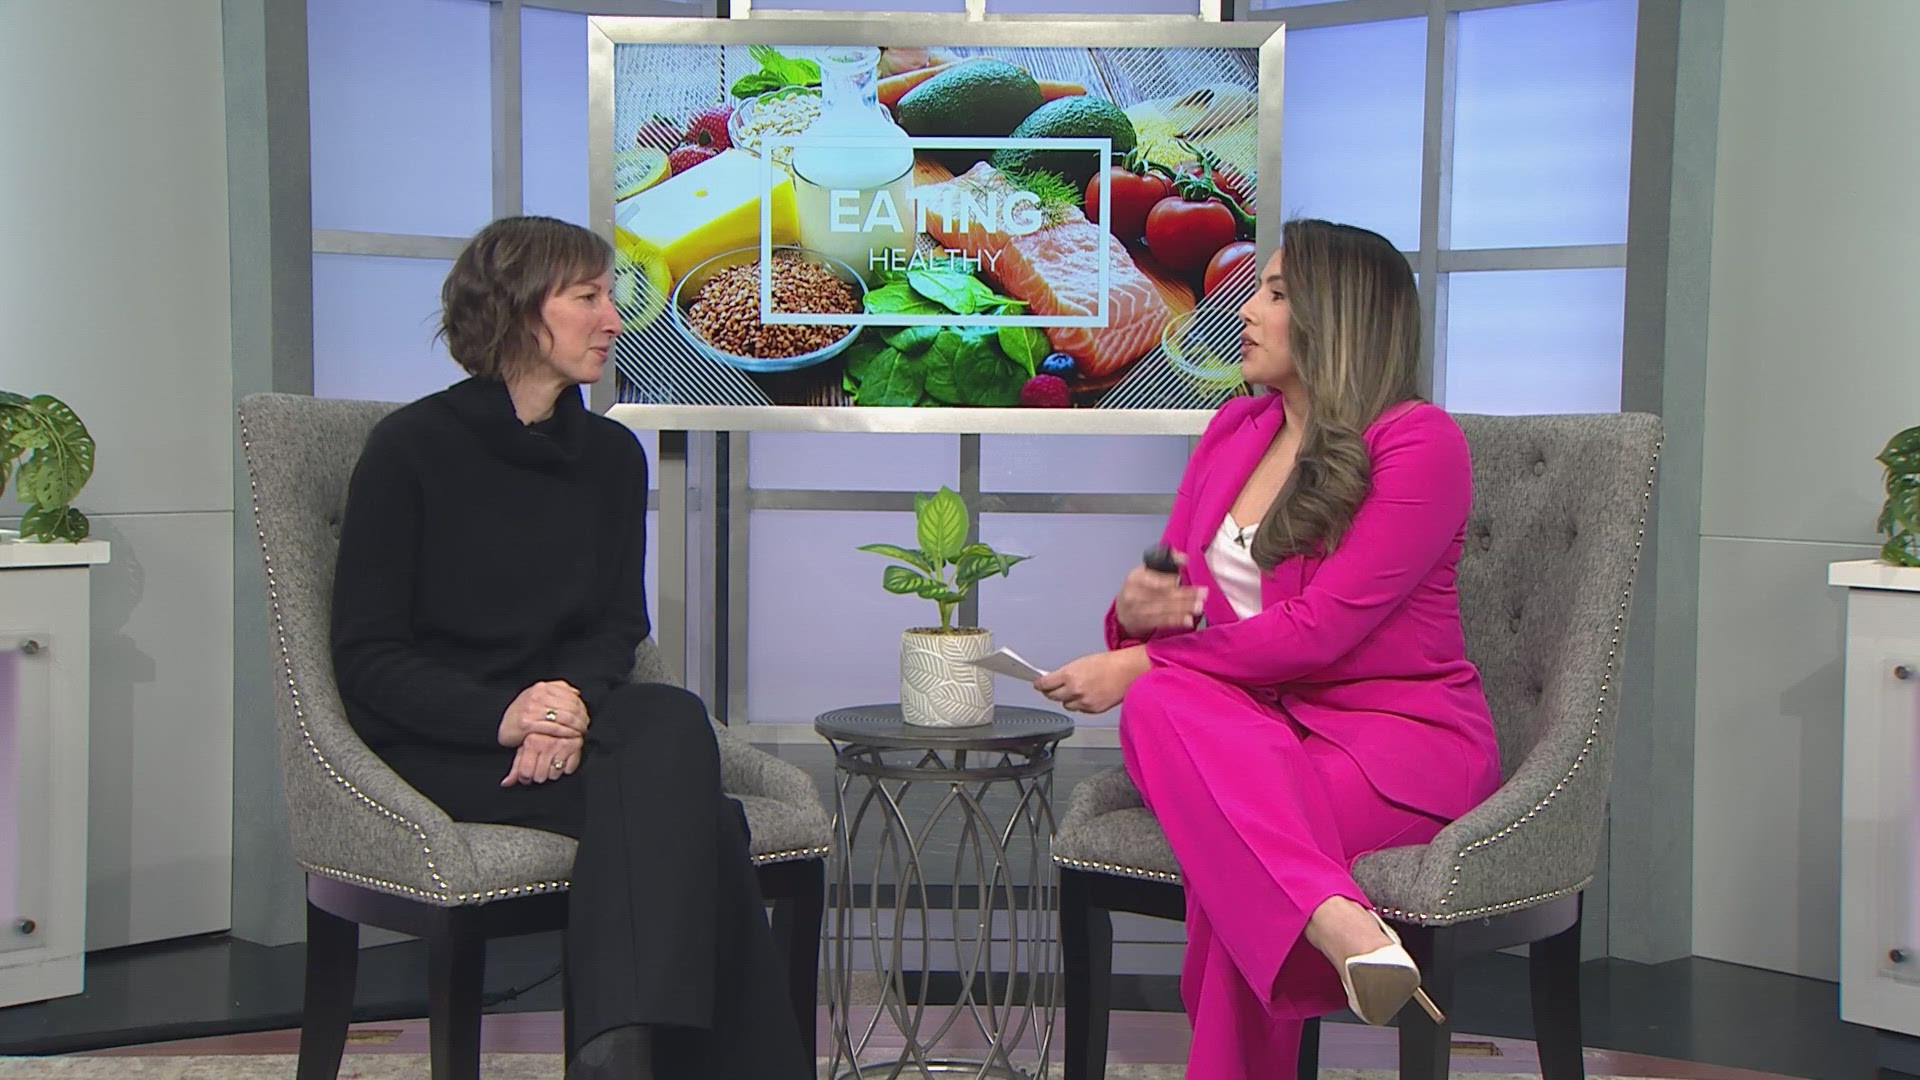 Dr. Elizabeth Easton talks about how New Year's resolutions focused on dieting can actually contribute to eating disorders.